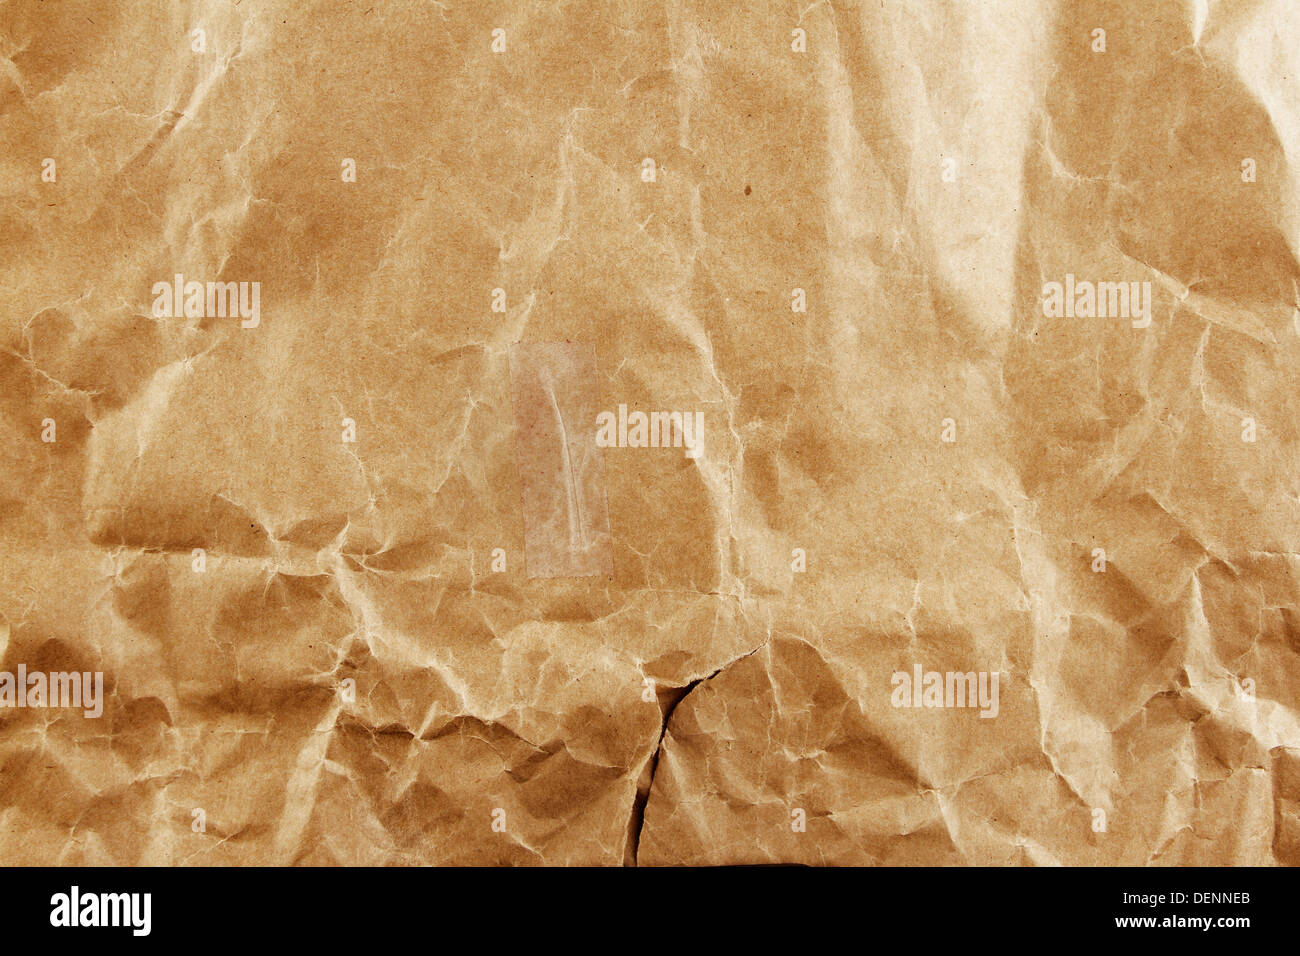 Closeup of brown wrinkled paper texture background Stock Photo